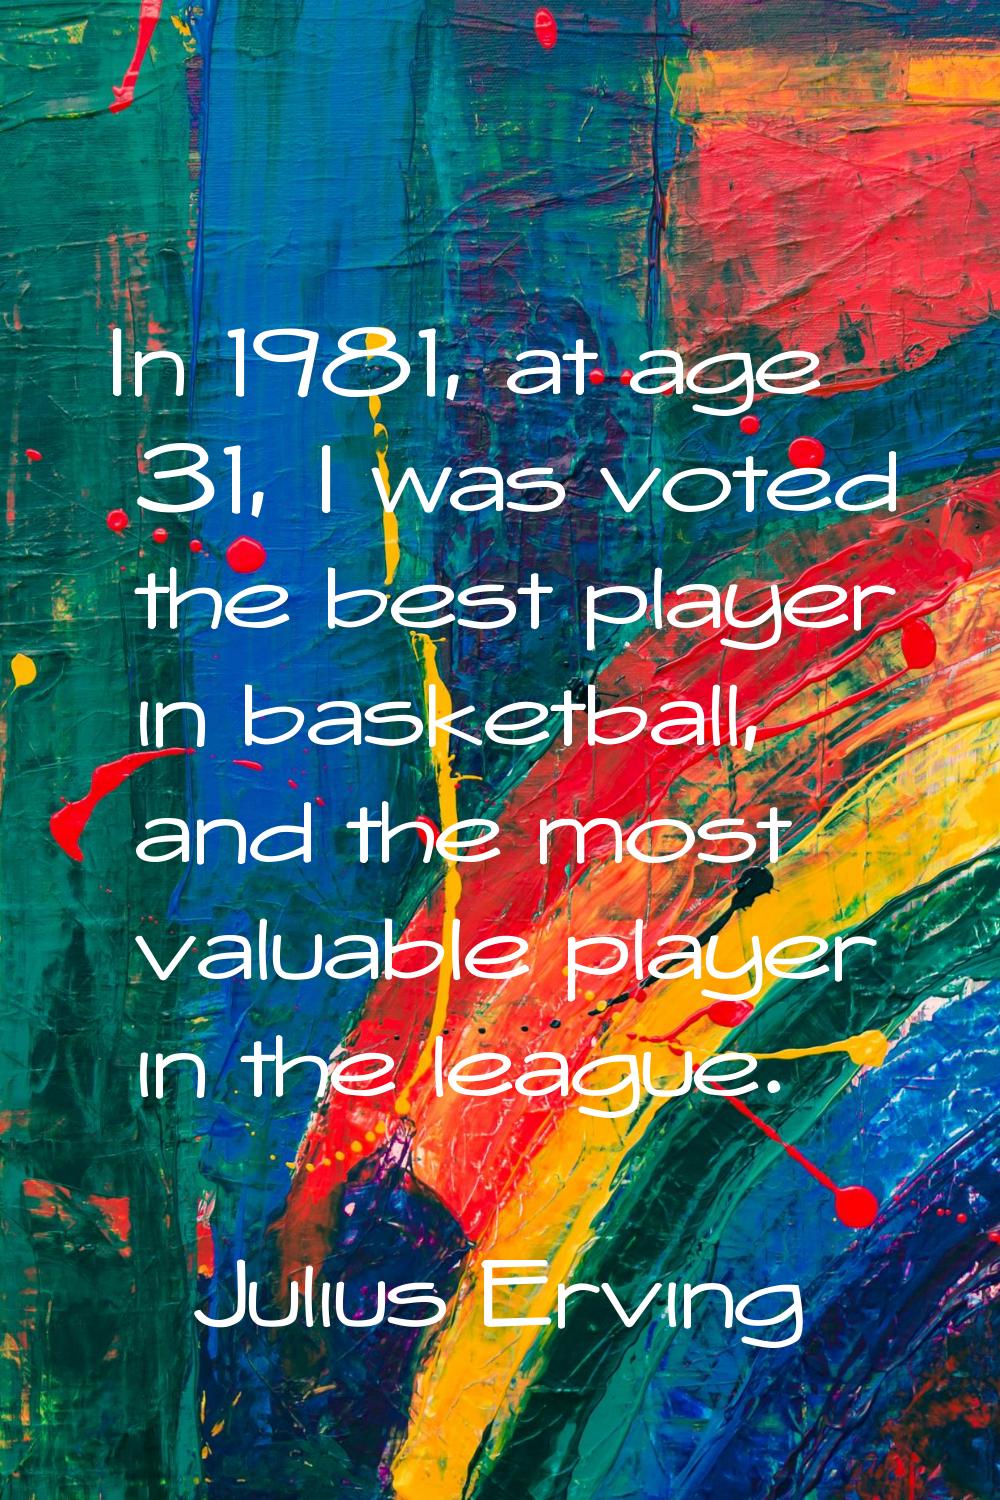 In 1981, at age 31, I was voted the best player in basketball, and the most valuable player in the 